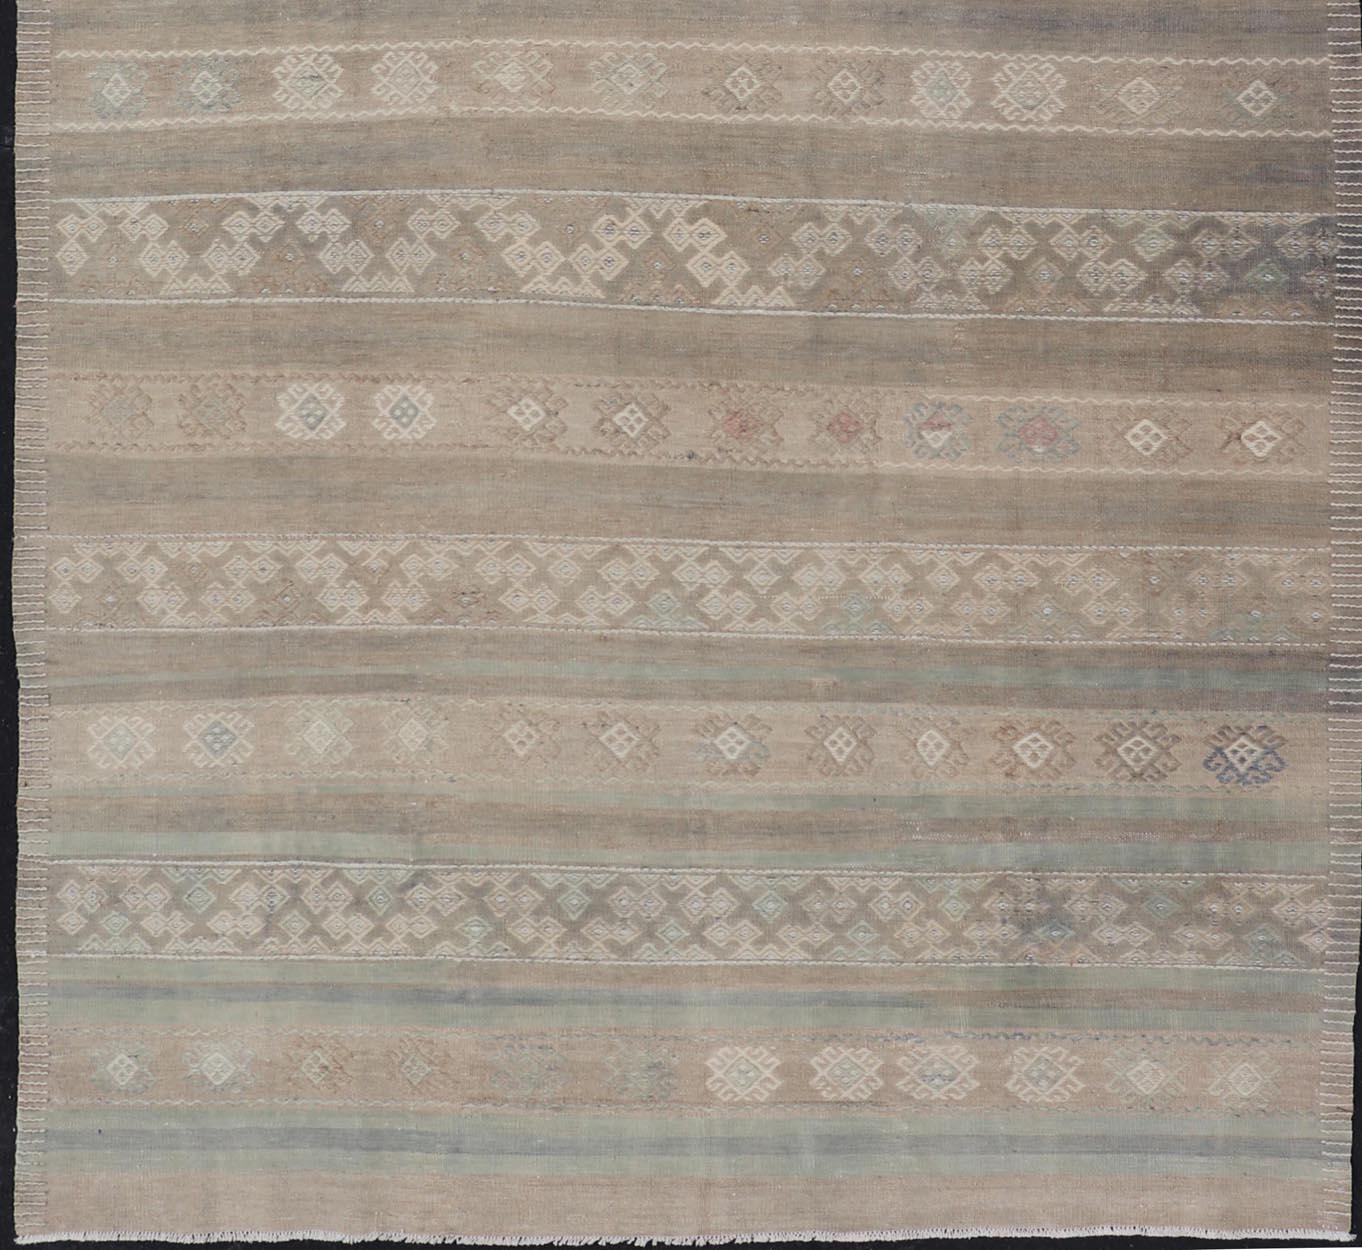 20th Century Vintage Turkish Kilim with Stripes in Taupe, Green, Tan, Cream and Brown For Sale